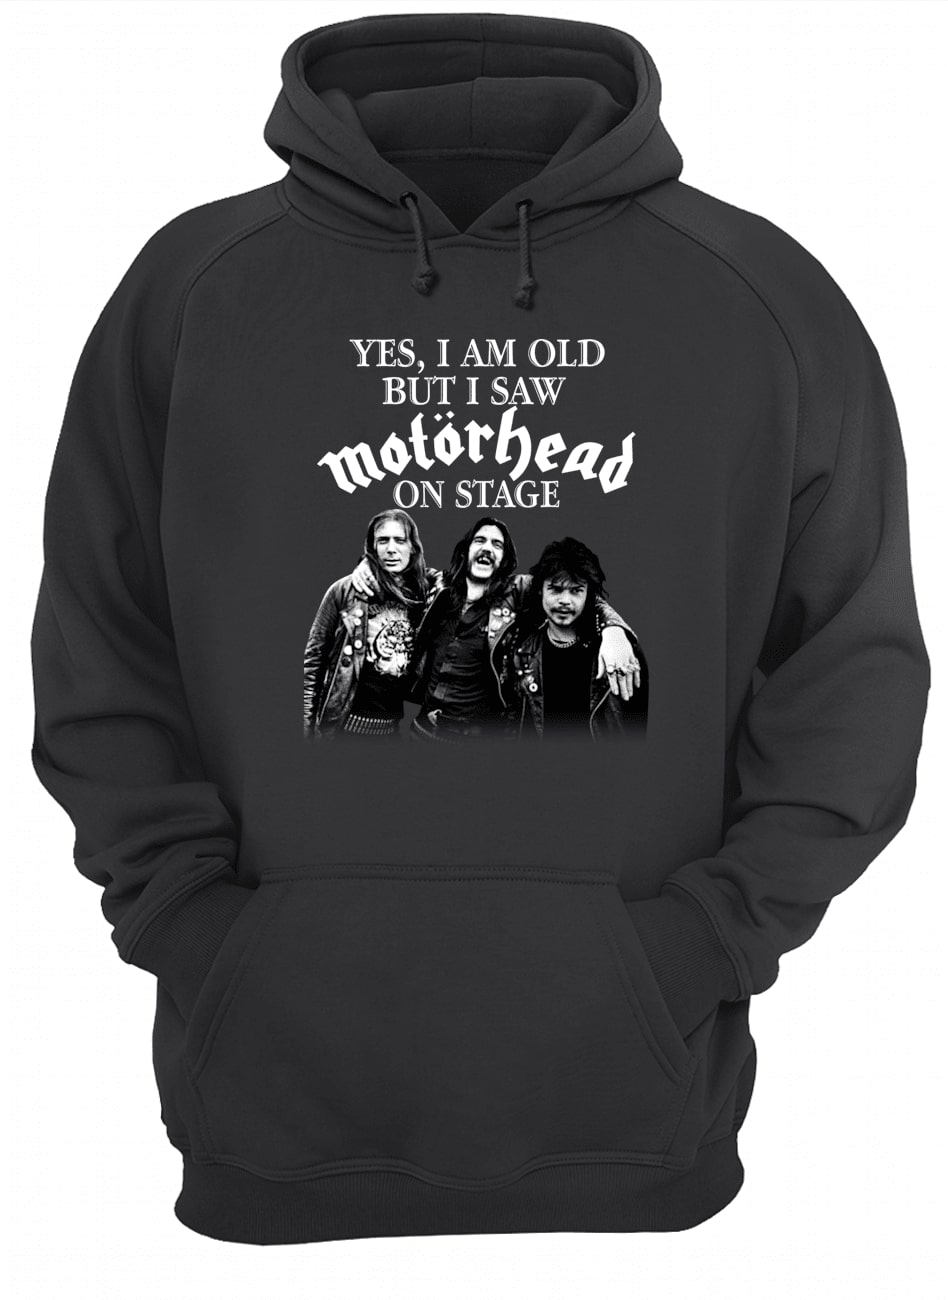 Yes i am old but i saw motorhead on stage hoodie